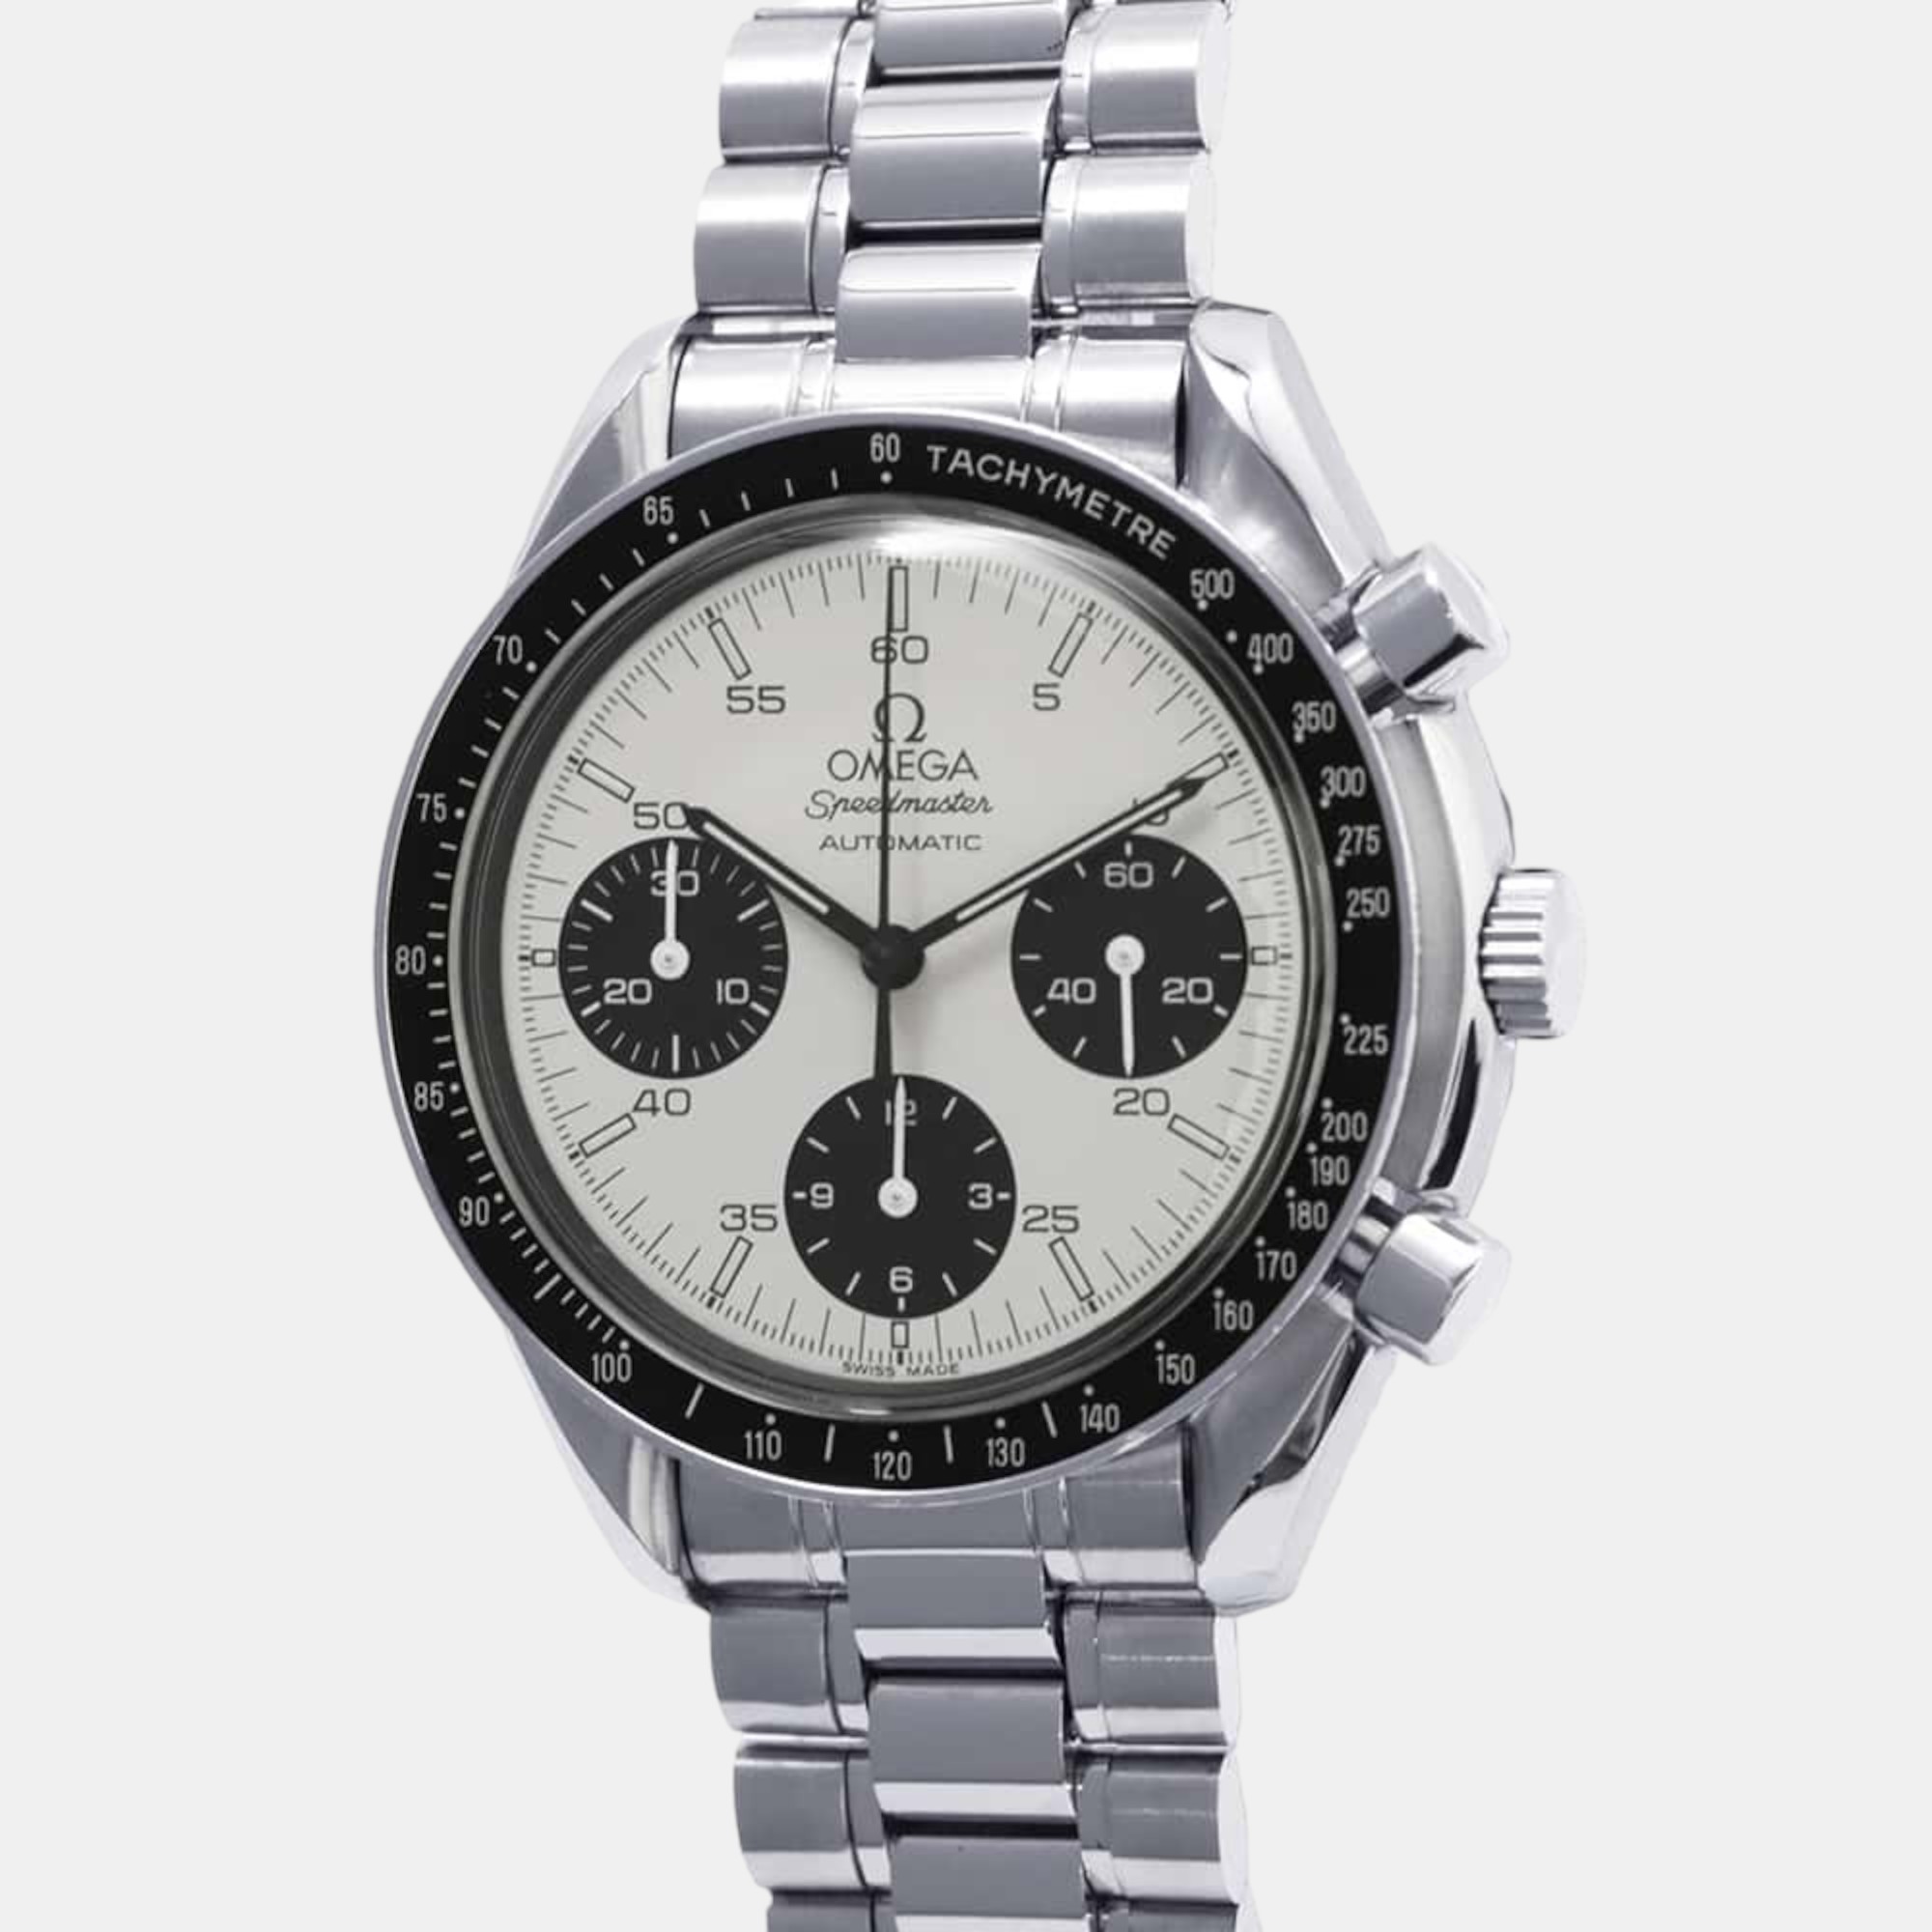 Omega white stainless steel speedmaster automatic men's wristwatch 39 mm